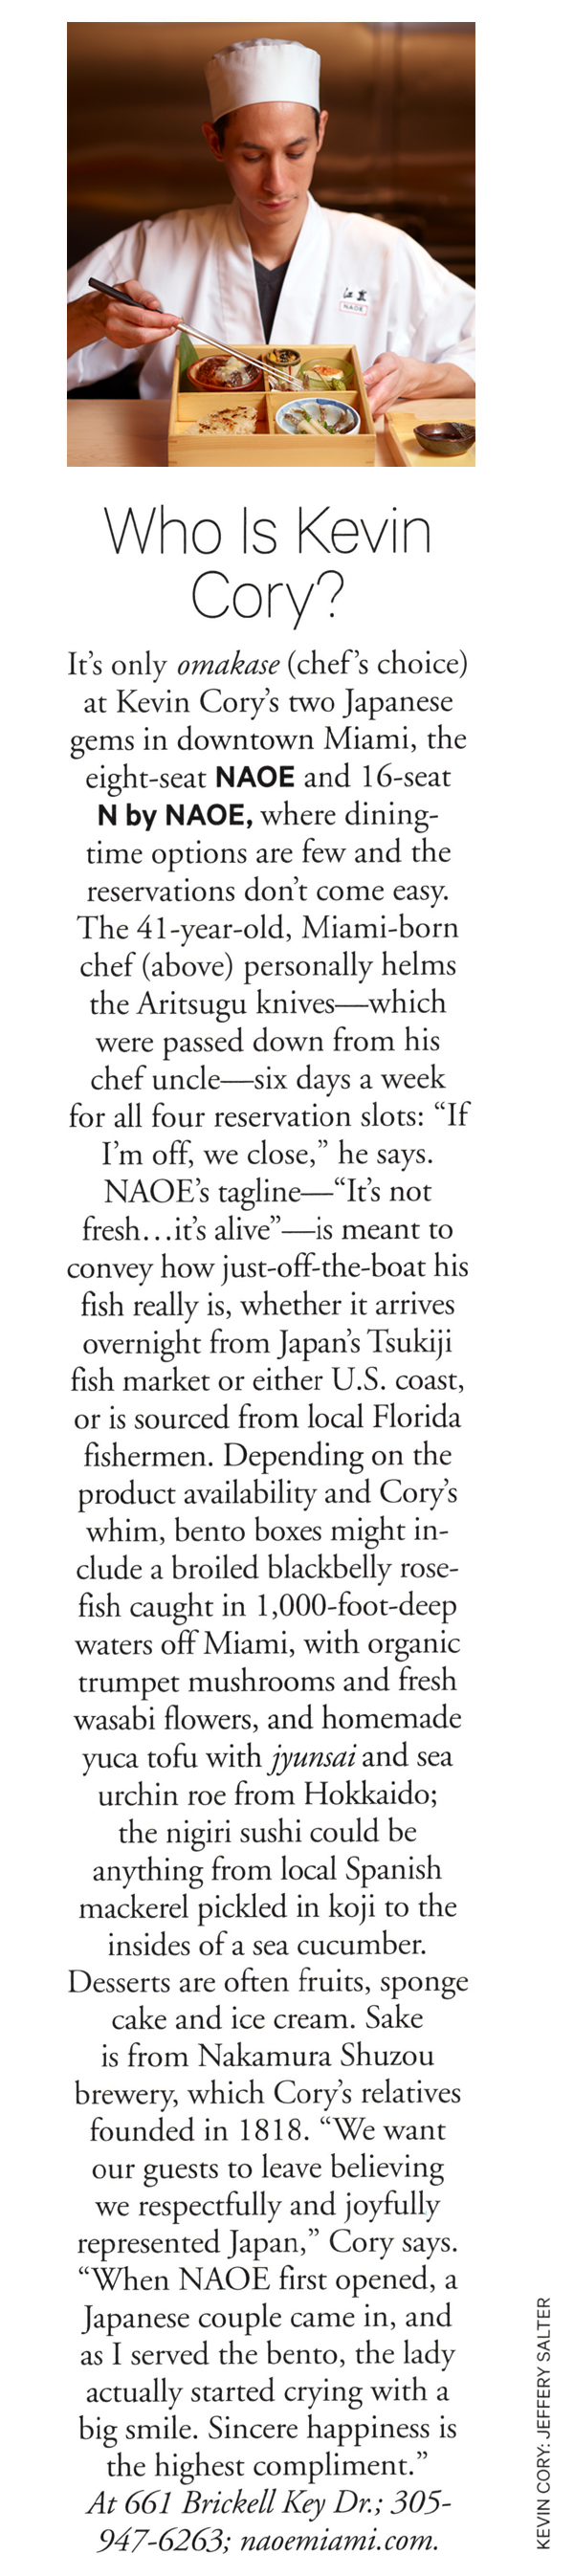 Departures Magazine, Who is Kevin Cory? It's only omakase (chef's choice) at Kevin Cory's two Japanese gems in downtown Miami, the eight-seat NAOE and 16-seat N by NAOE, where dining-time options are few and the reservations don't come easy. The 41-year-old, Miami-born chef (above) personally helms the Aritsugu knives—which were passed down from his chef uncle—six days a week for all four reservation slots: 'If I'm off, we close,' he says. NAOE's tagline—'It's not fresh...it's alive'—is meant to convey how just-off-the-boat his fish really is, whether it arrives overnight from Japan's Tsukiji fish market or either U.S. coast, or is sourced from local Florida fishermen. Depending on the product availability and Cory's whim, bento boxes might include a broiled blackbelly rose-fish caught in 1,000-foot-deep waters off Miami, with organic trumpet mushrooms and fresh wasabi flowers, and homemade yuca tofu with jyunsai and sea urchin roe from Hokkaido; the nigiri sushi could be anything from local Spanish mackerel pickled in koji to the insides of a sea cucumber. Desserts are often fruits, sponge cake and ice cream. Sake is from Nakamura Shuzou brewery, which Cory's relatives founded in 1818. 'We want our guests to leave believing we respectfully and joyfully represented Japan,' Cory says. 'When NAOE first opeend, a Japanese couple came in, and as I served the bento, the lady actually started crying with a big smile. Sincere happiness is the highest compliment.' At 661 Brickell Key Dr. Photographer Jeffery Salter